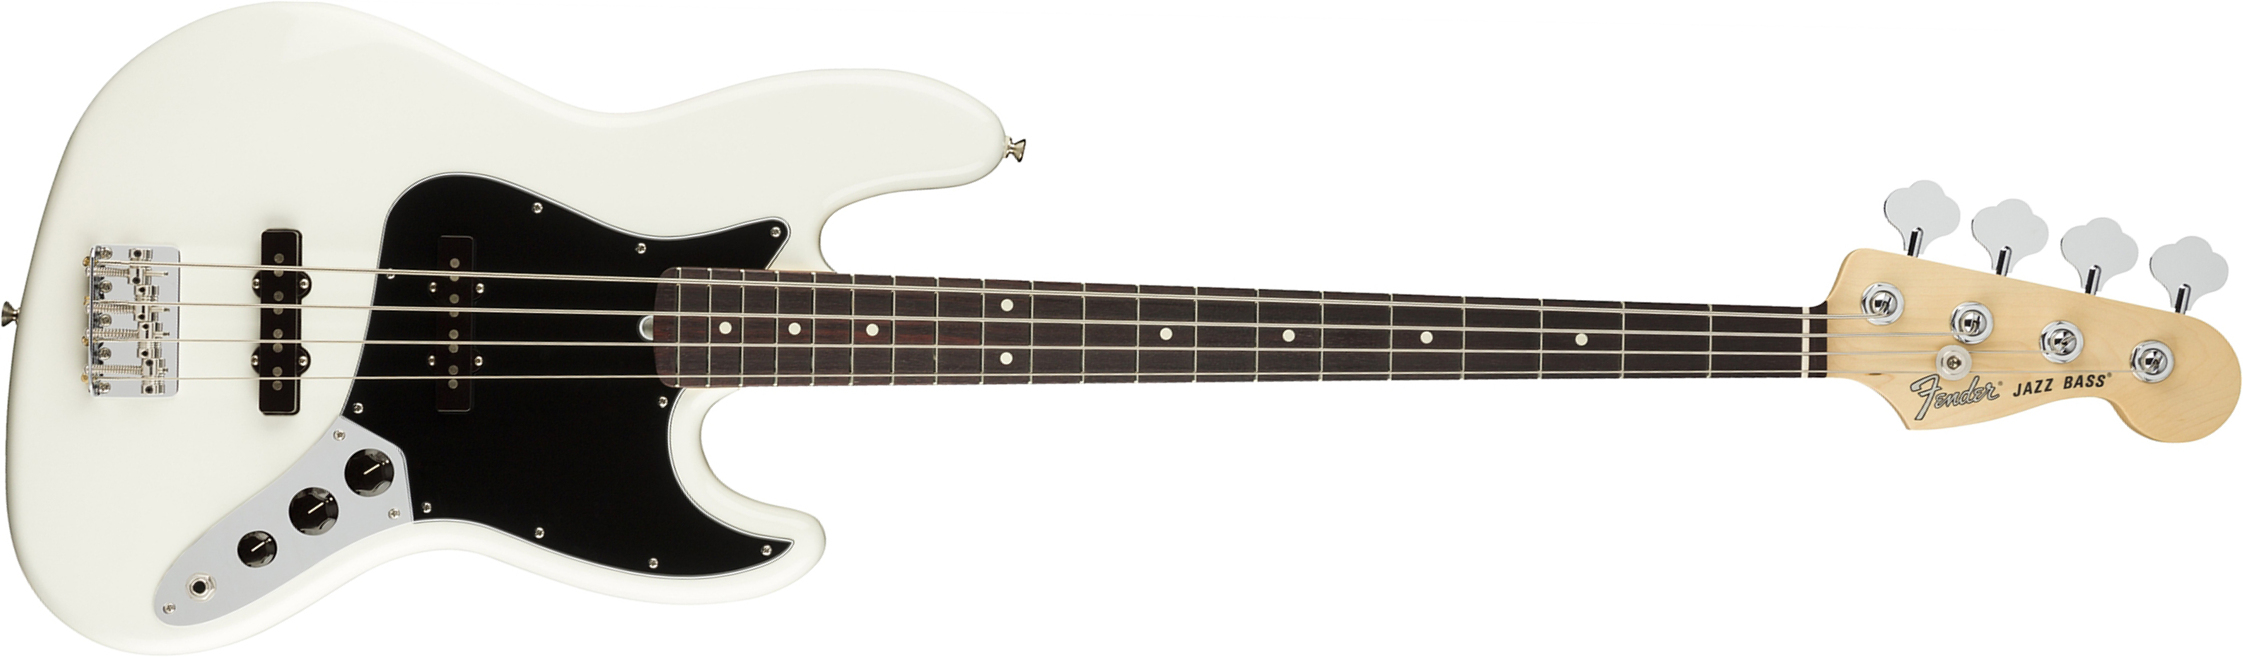 Fender Jazz Bass American Performer Usa Rw - Arctic White - Basse Électrique Solid Body - Main picture